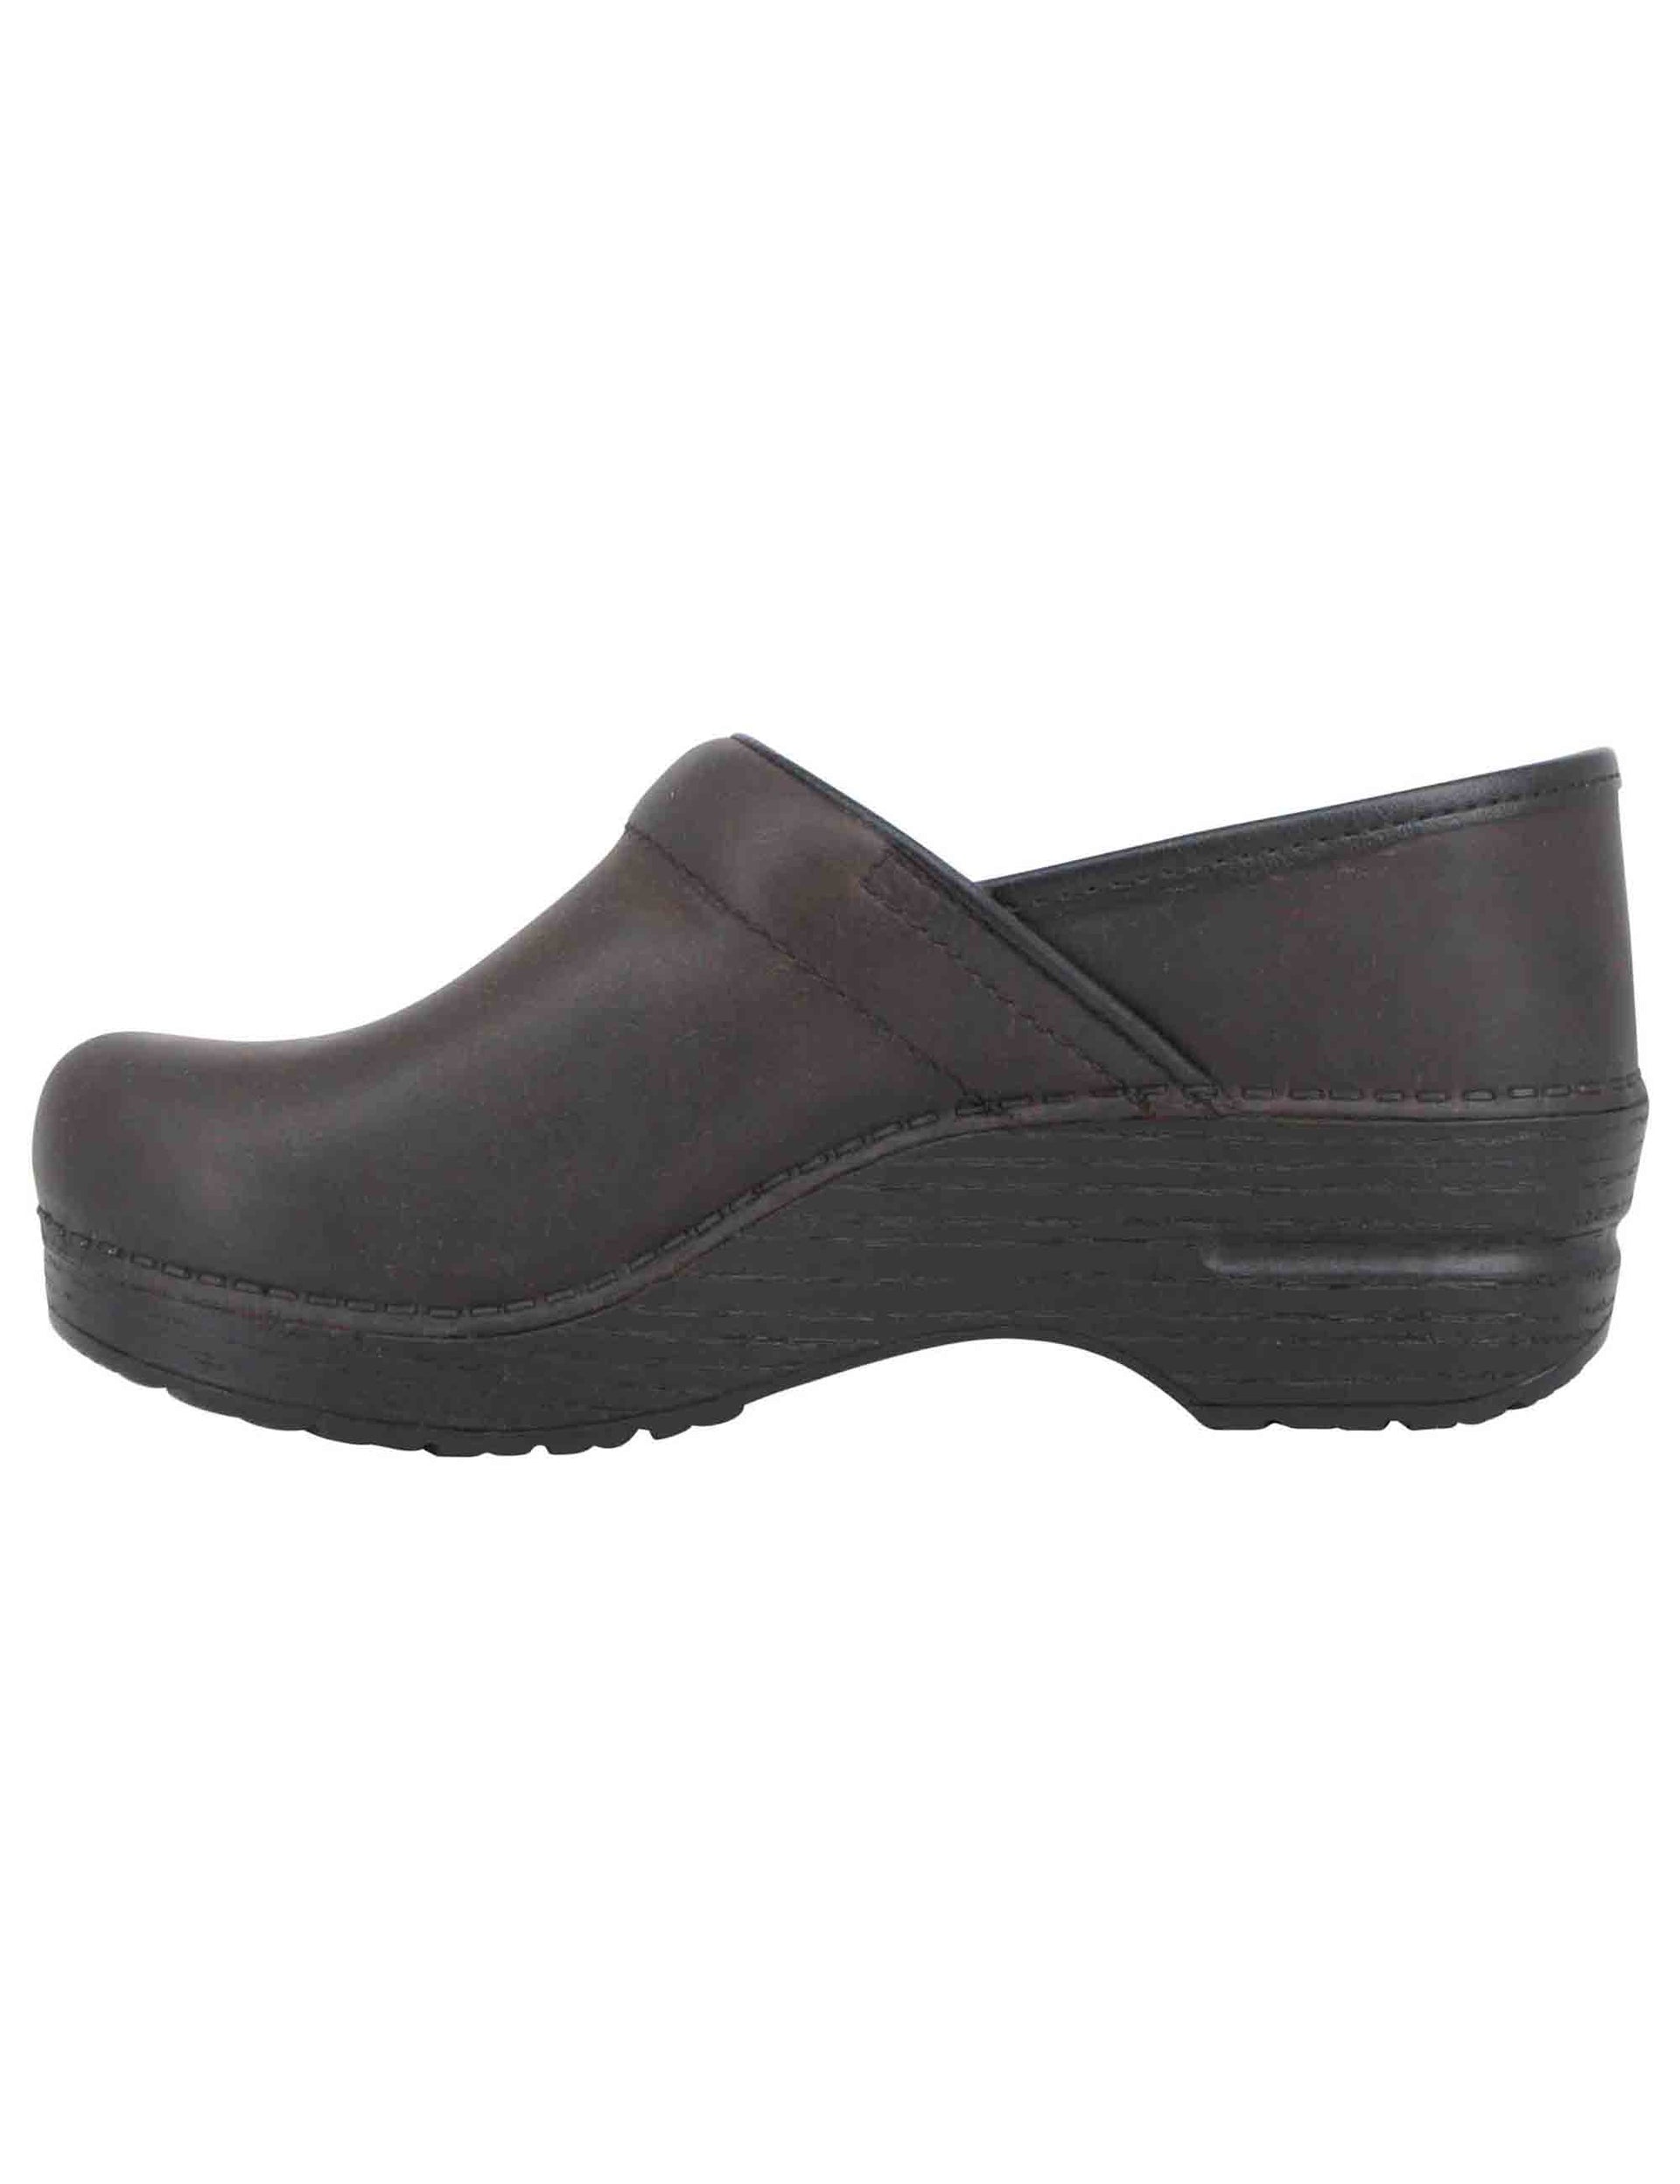 Professional women's clogs in dark brown leather